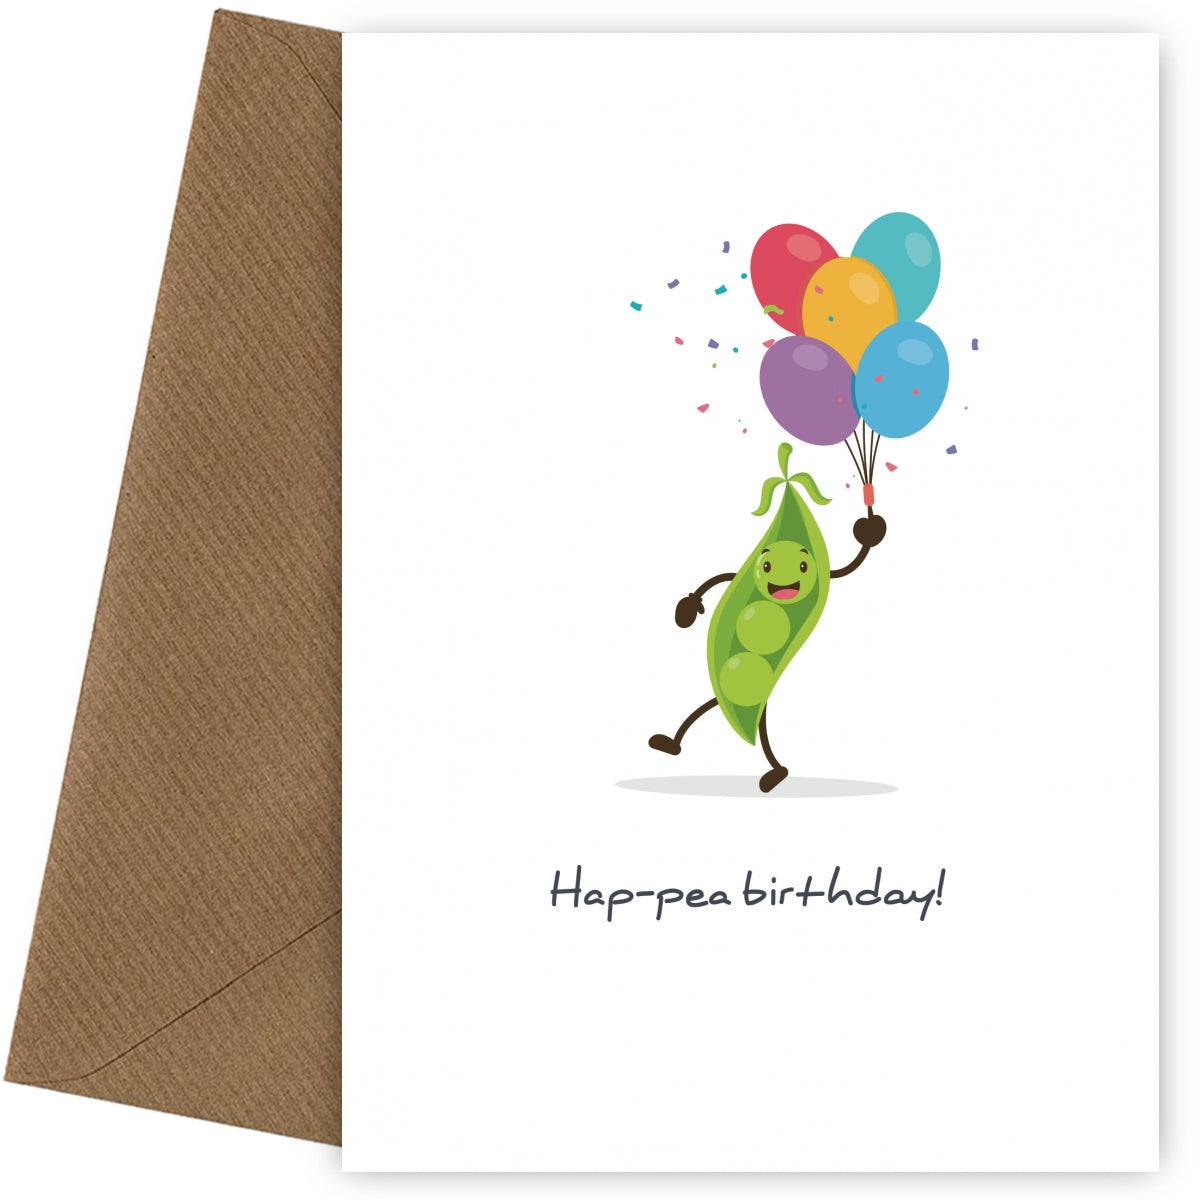 Humorous and Funny Birthday Cards for Men and Women - Hap-pea Birthday!